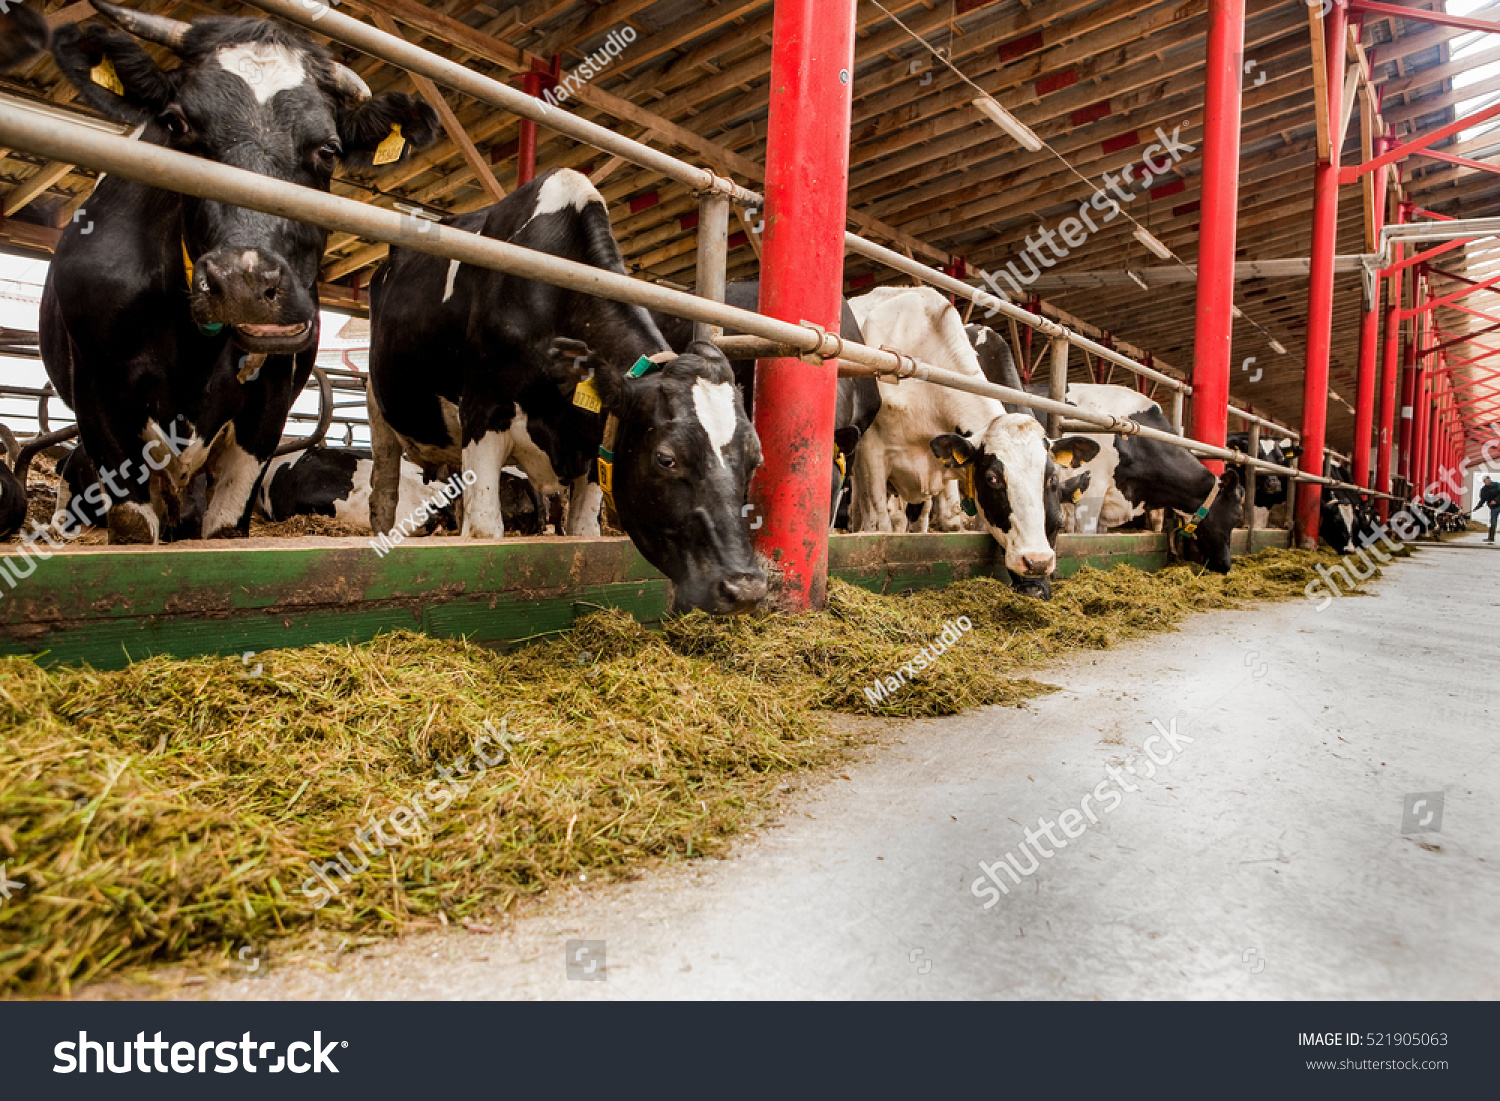 Cows on a farm eating grass, cattle, hay #521905063